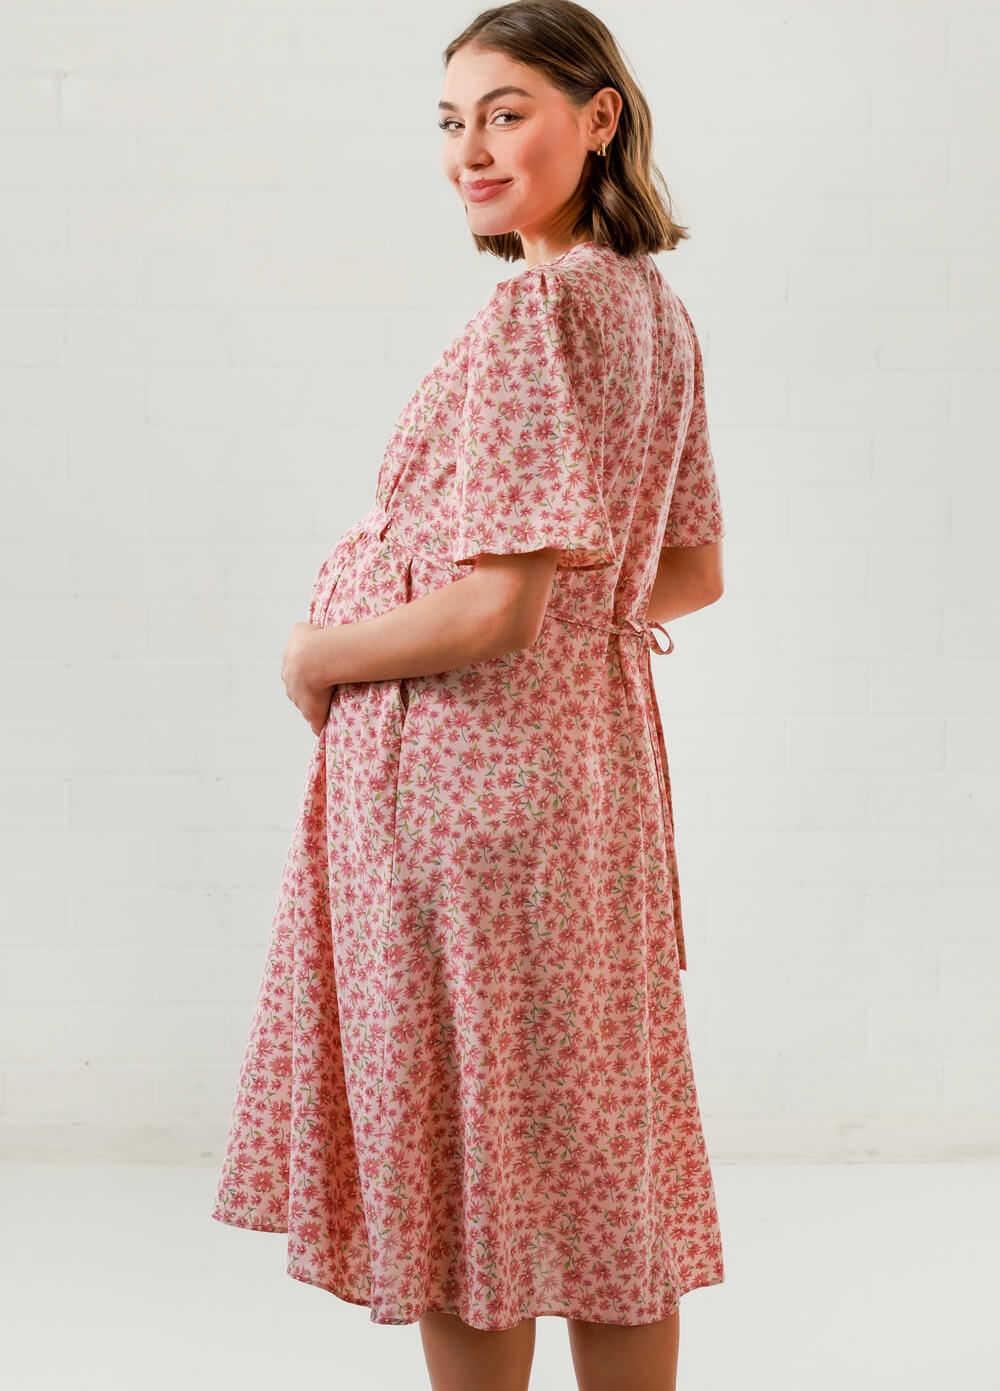 Lait & Co - Lucie-Marie Maternity Dress in Pink Floral